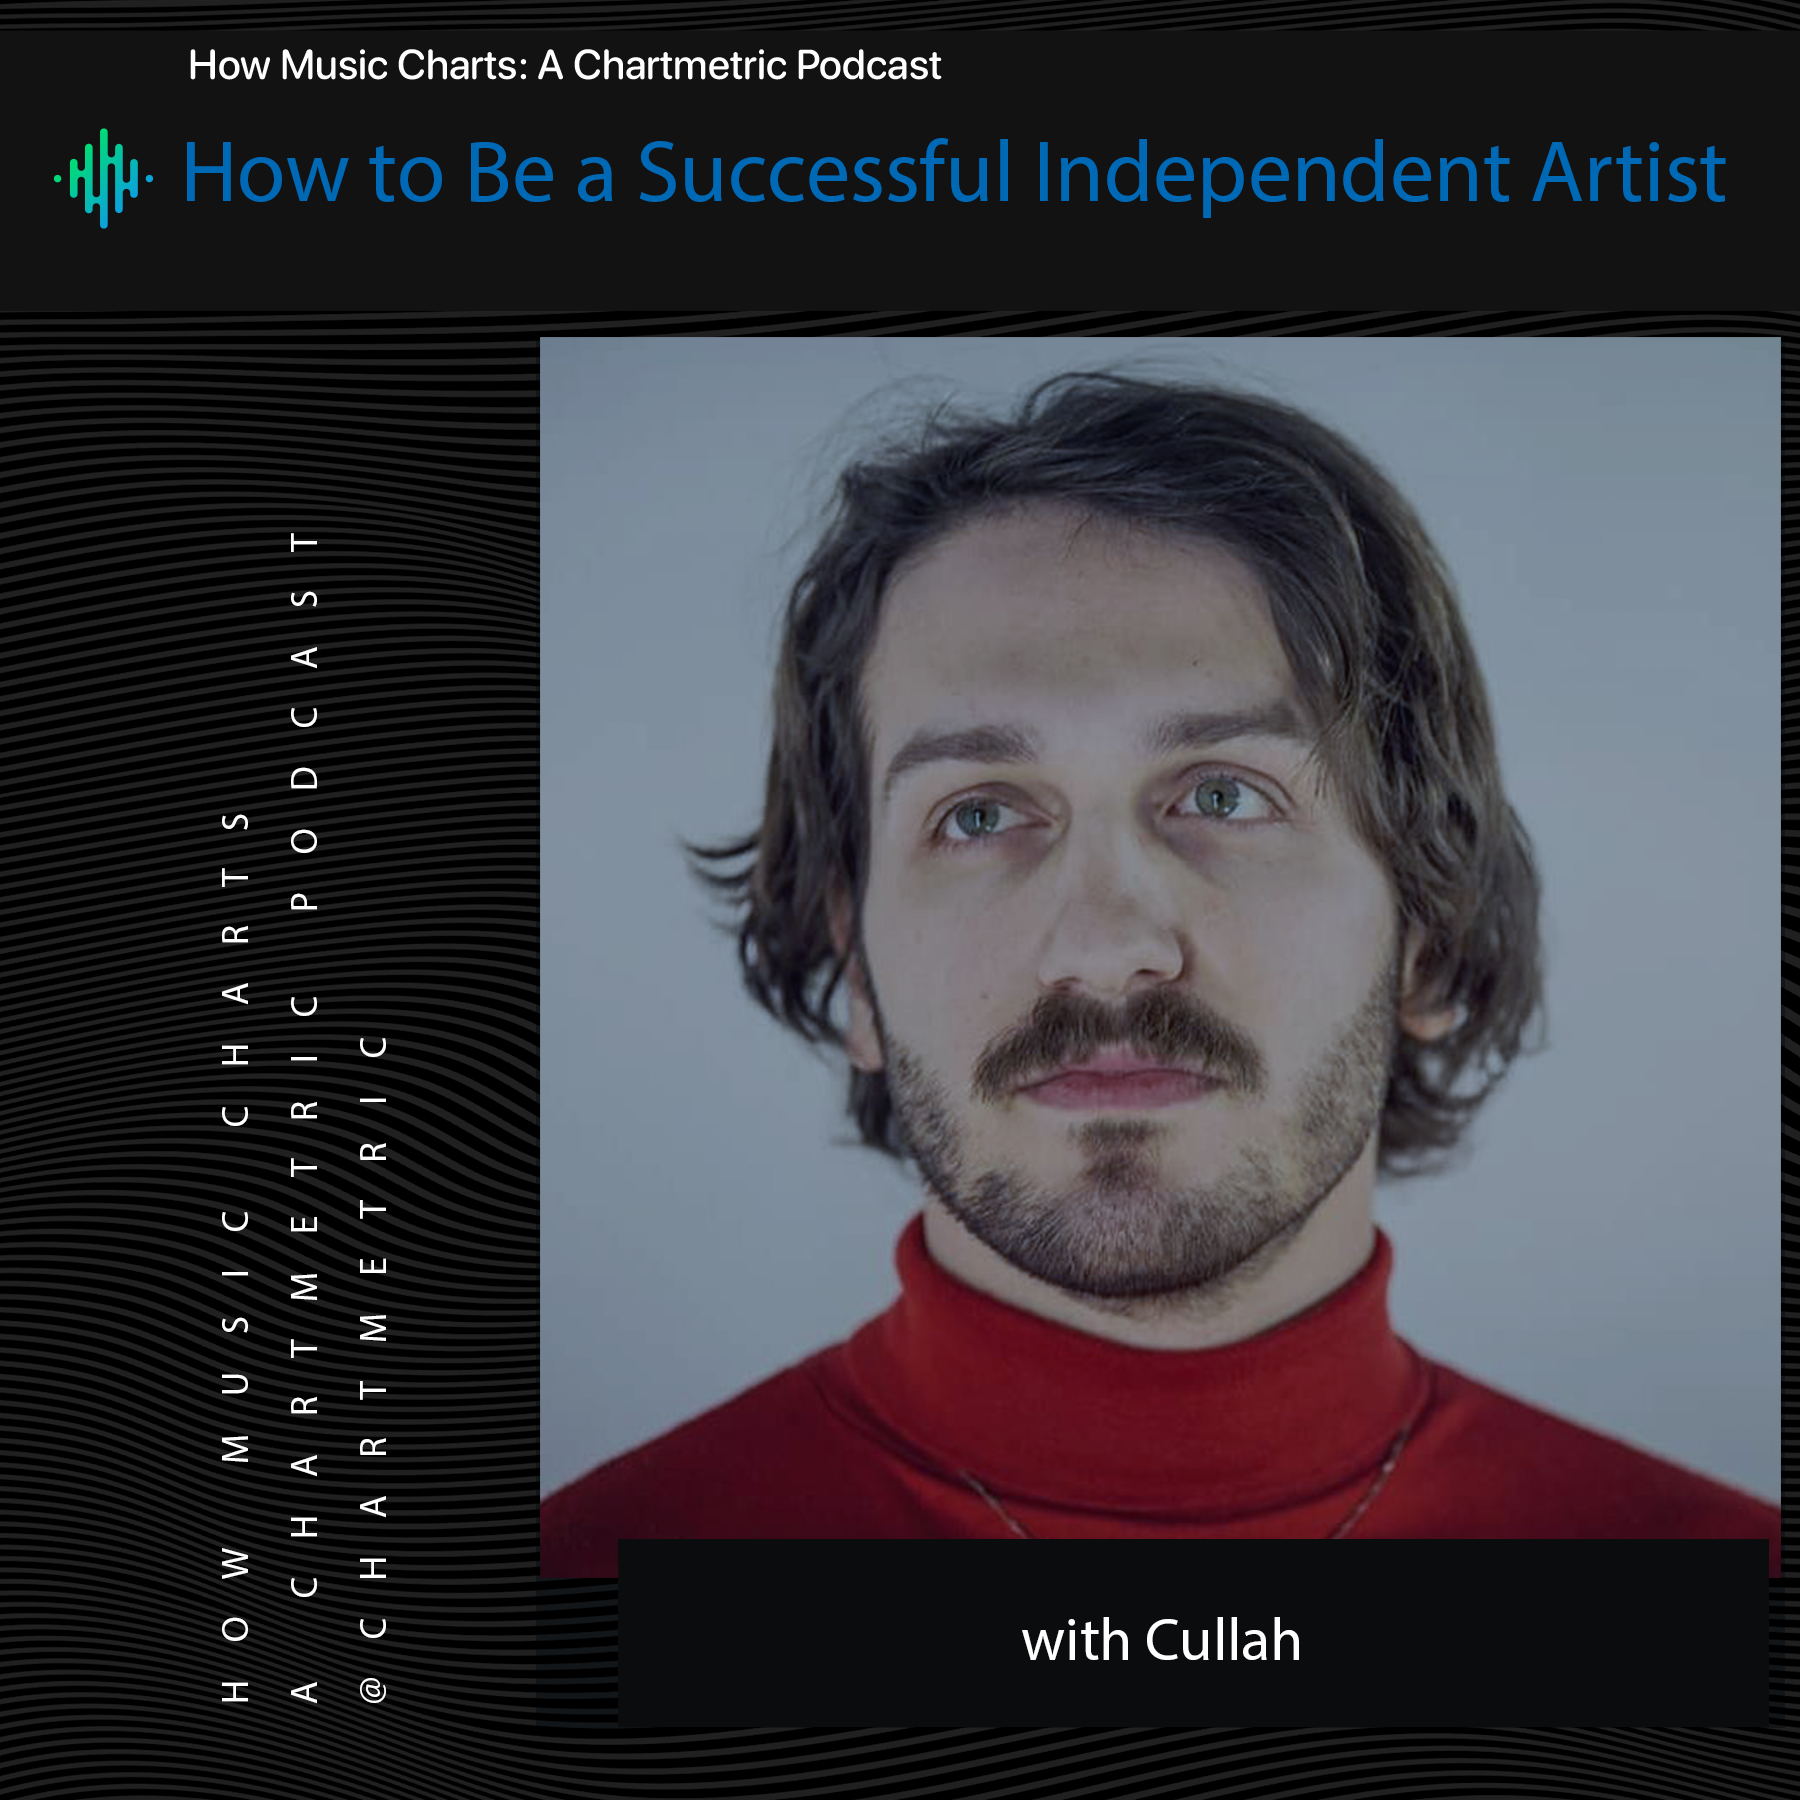 How to Be a Successful Independent Artist With Cullah